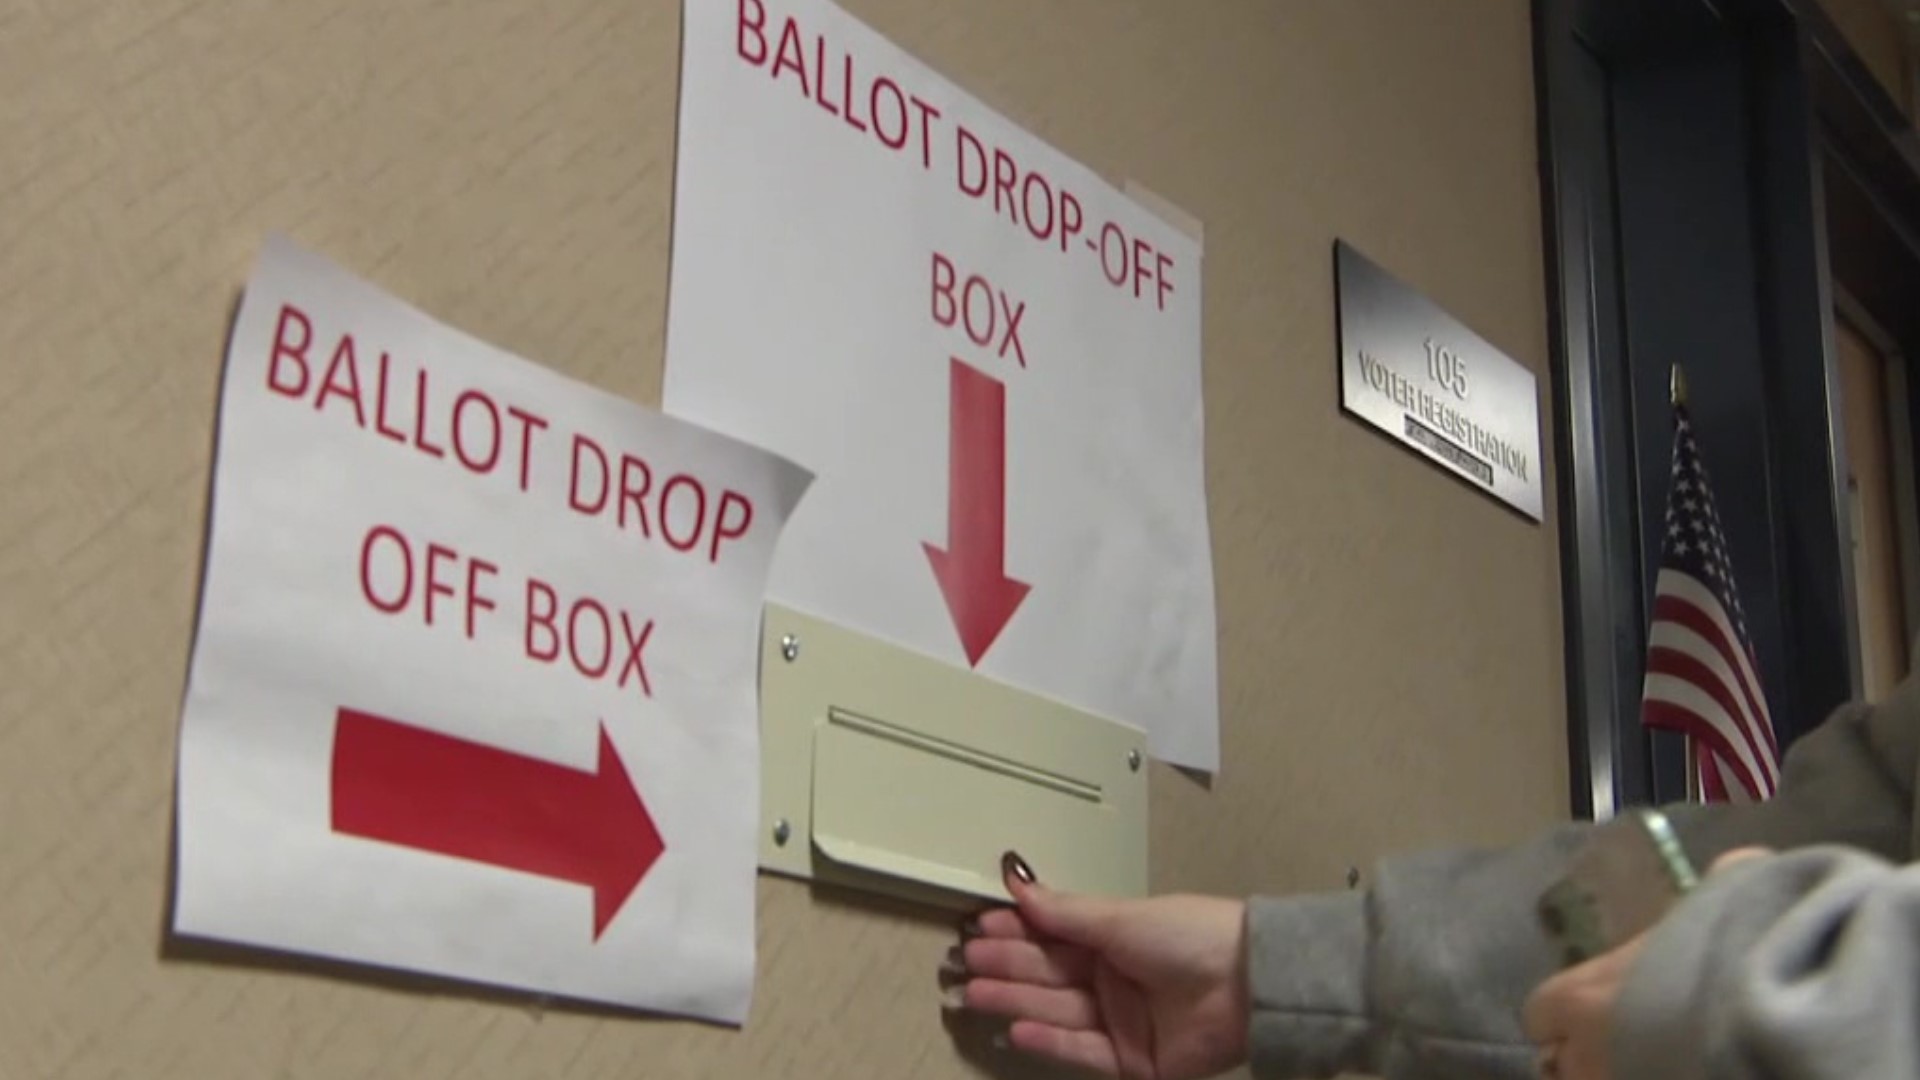 You have until 8 p.m. on Election Day to drop off your mail-in ballot at your county's election office.